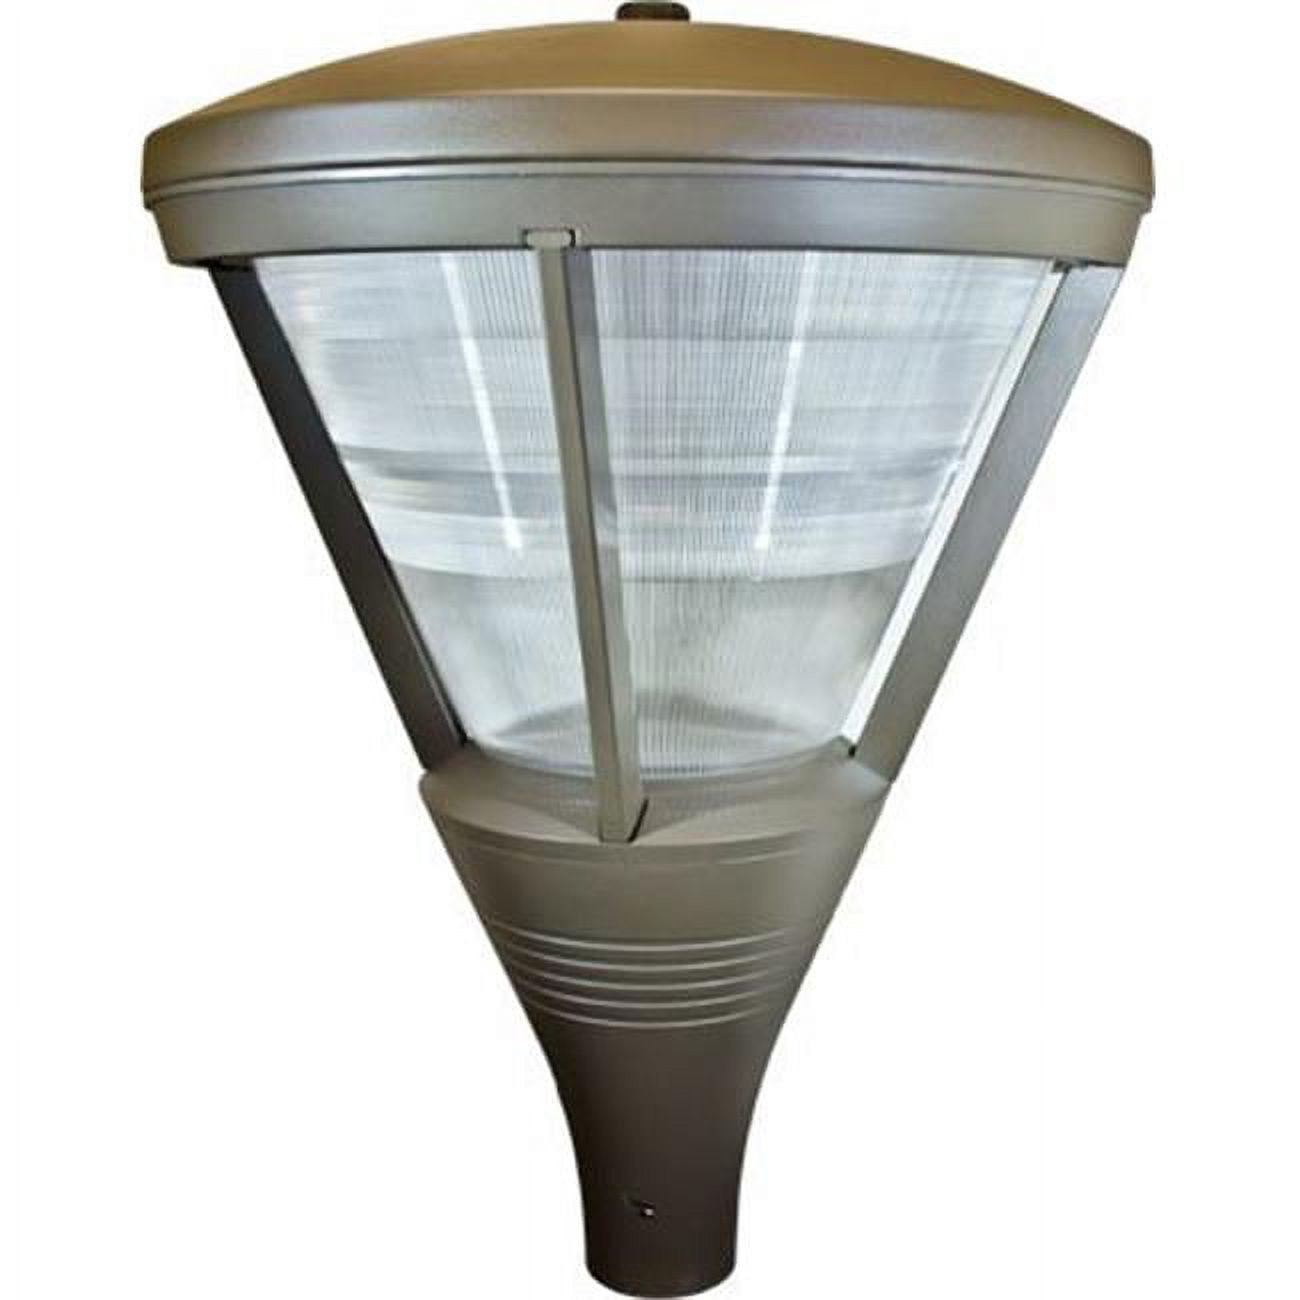 Picture of Dabmar Lighting GM580-BZ Powder Coated Cast Aluminum Architectural Post Top Light Fixture, Bronze - 34.50 x 25.25 x 25.25 in.